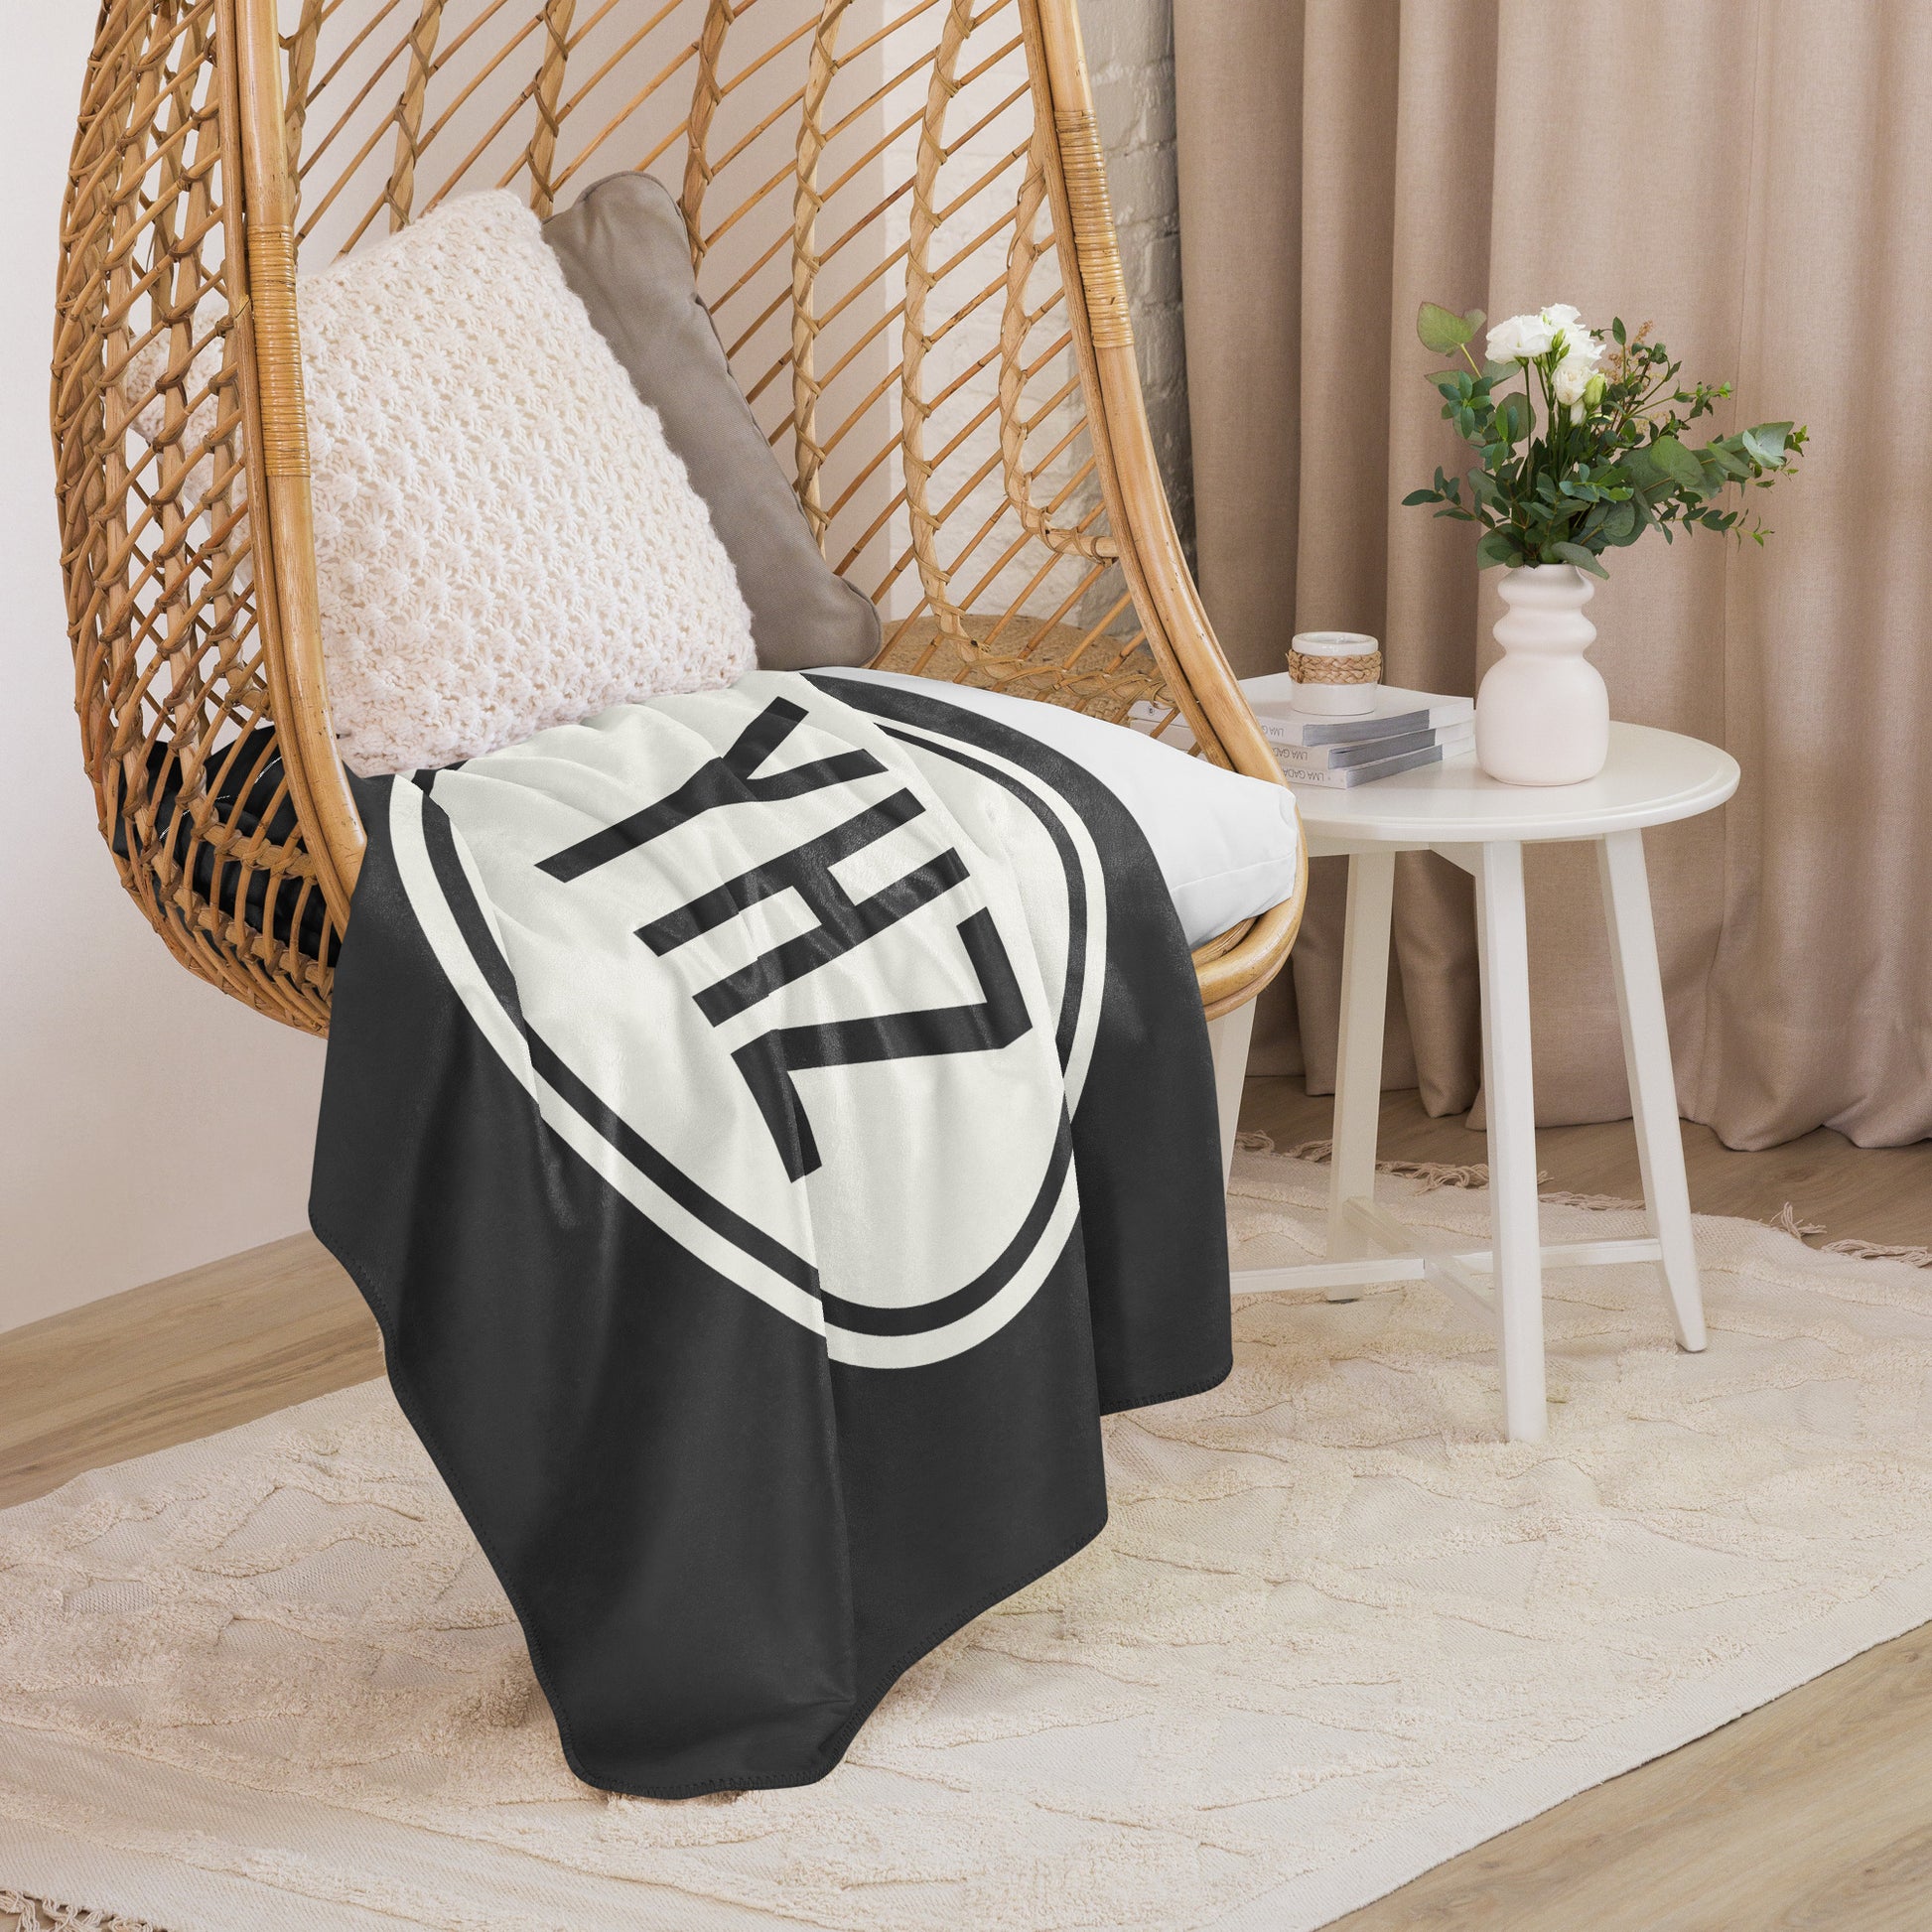 Unique Travel Gift Sherpa Blanket - White Oval • YHZ Halifax • YHM Designs - Image 06